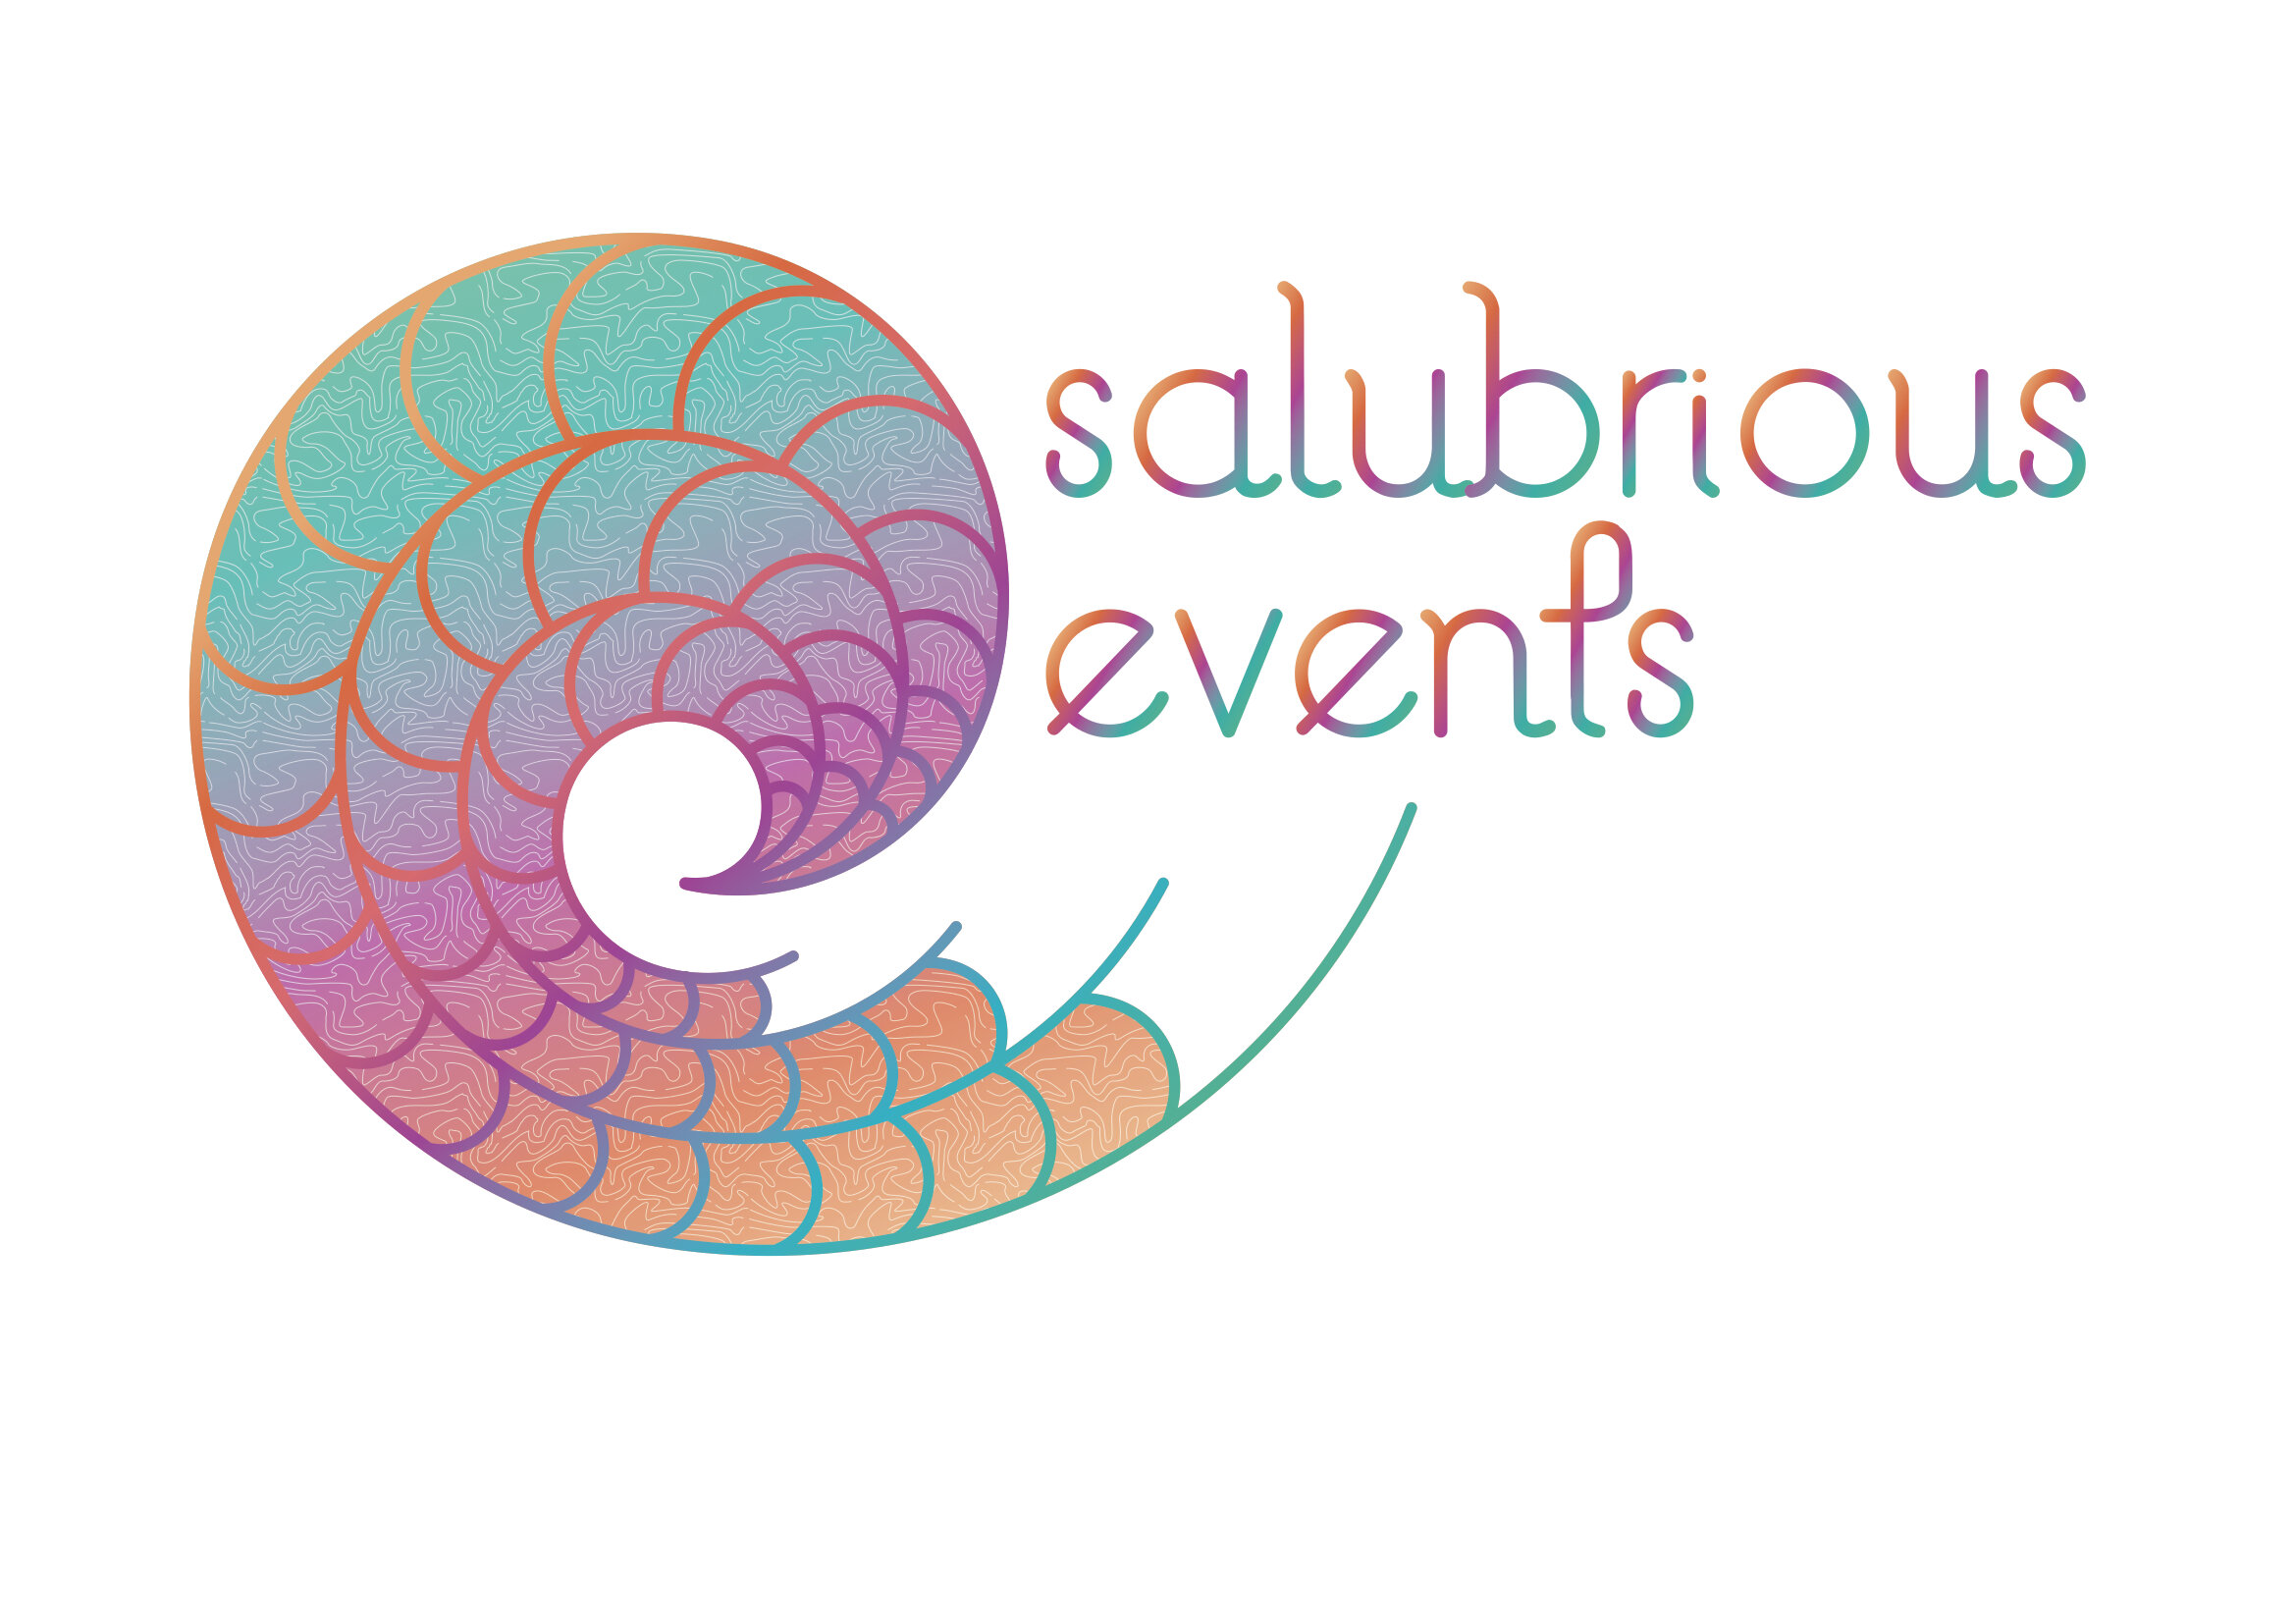 salubrious events